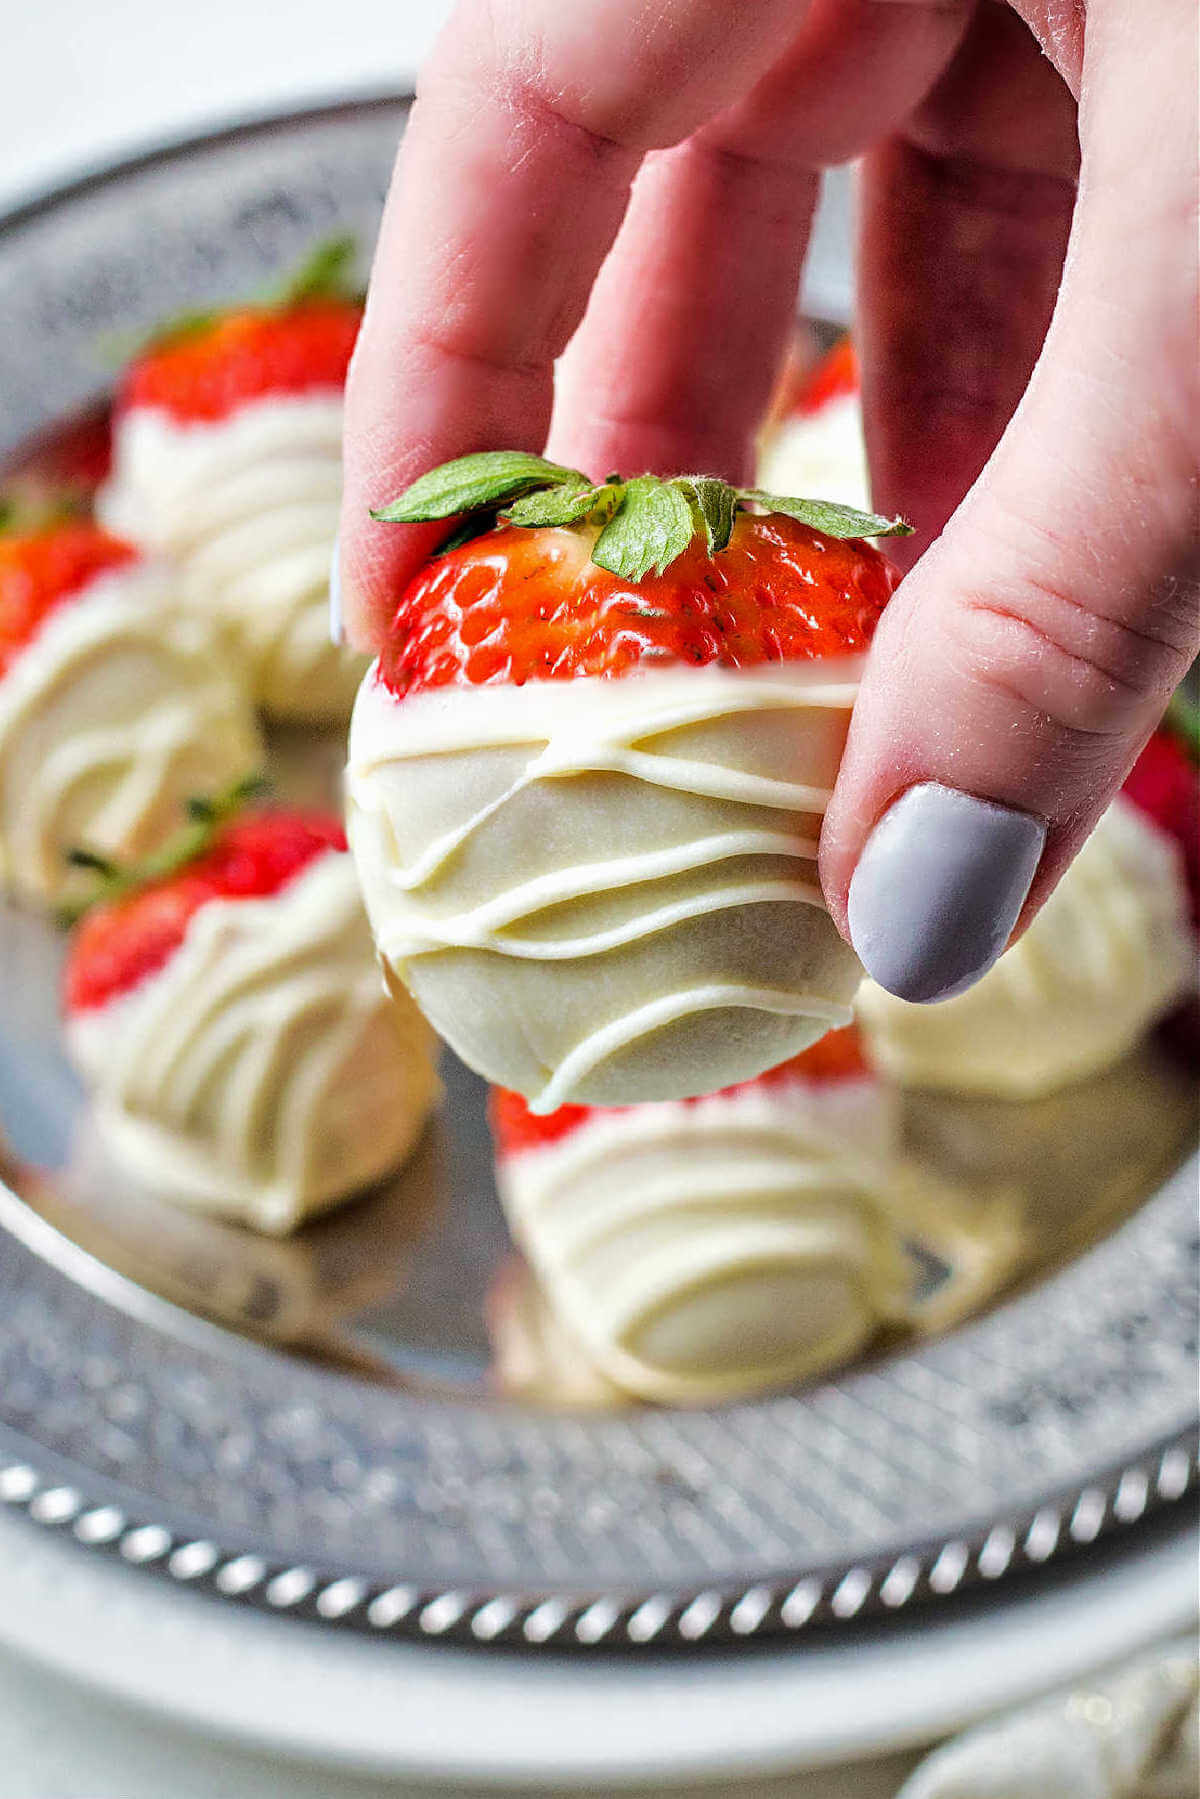 a lady's hand holding a white chocolate dipped strawberry with a plate of strawberries in the background.